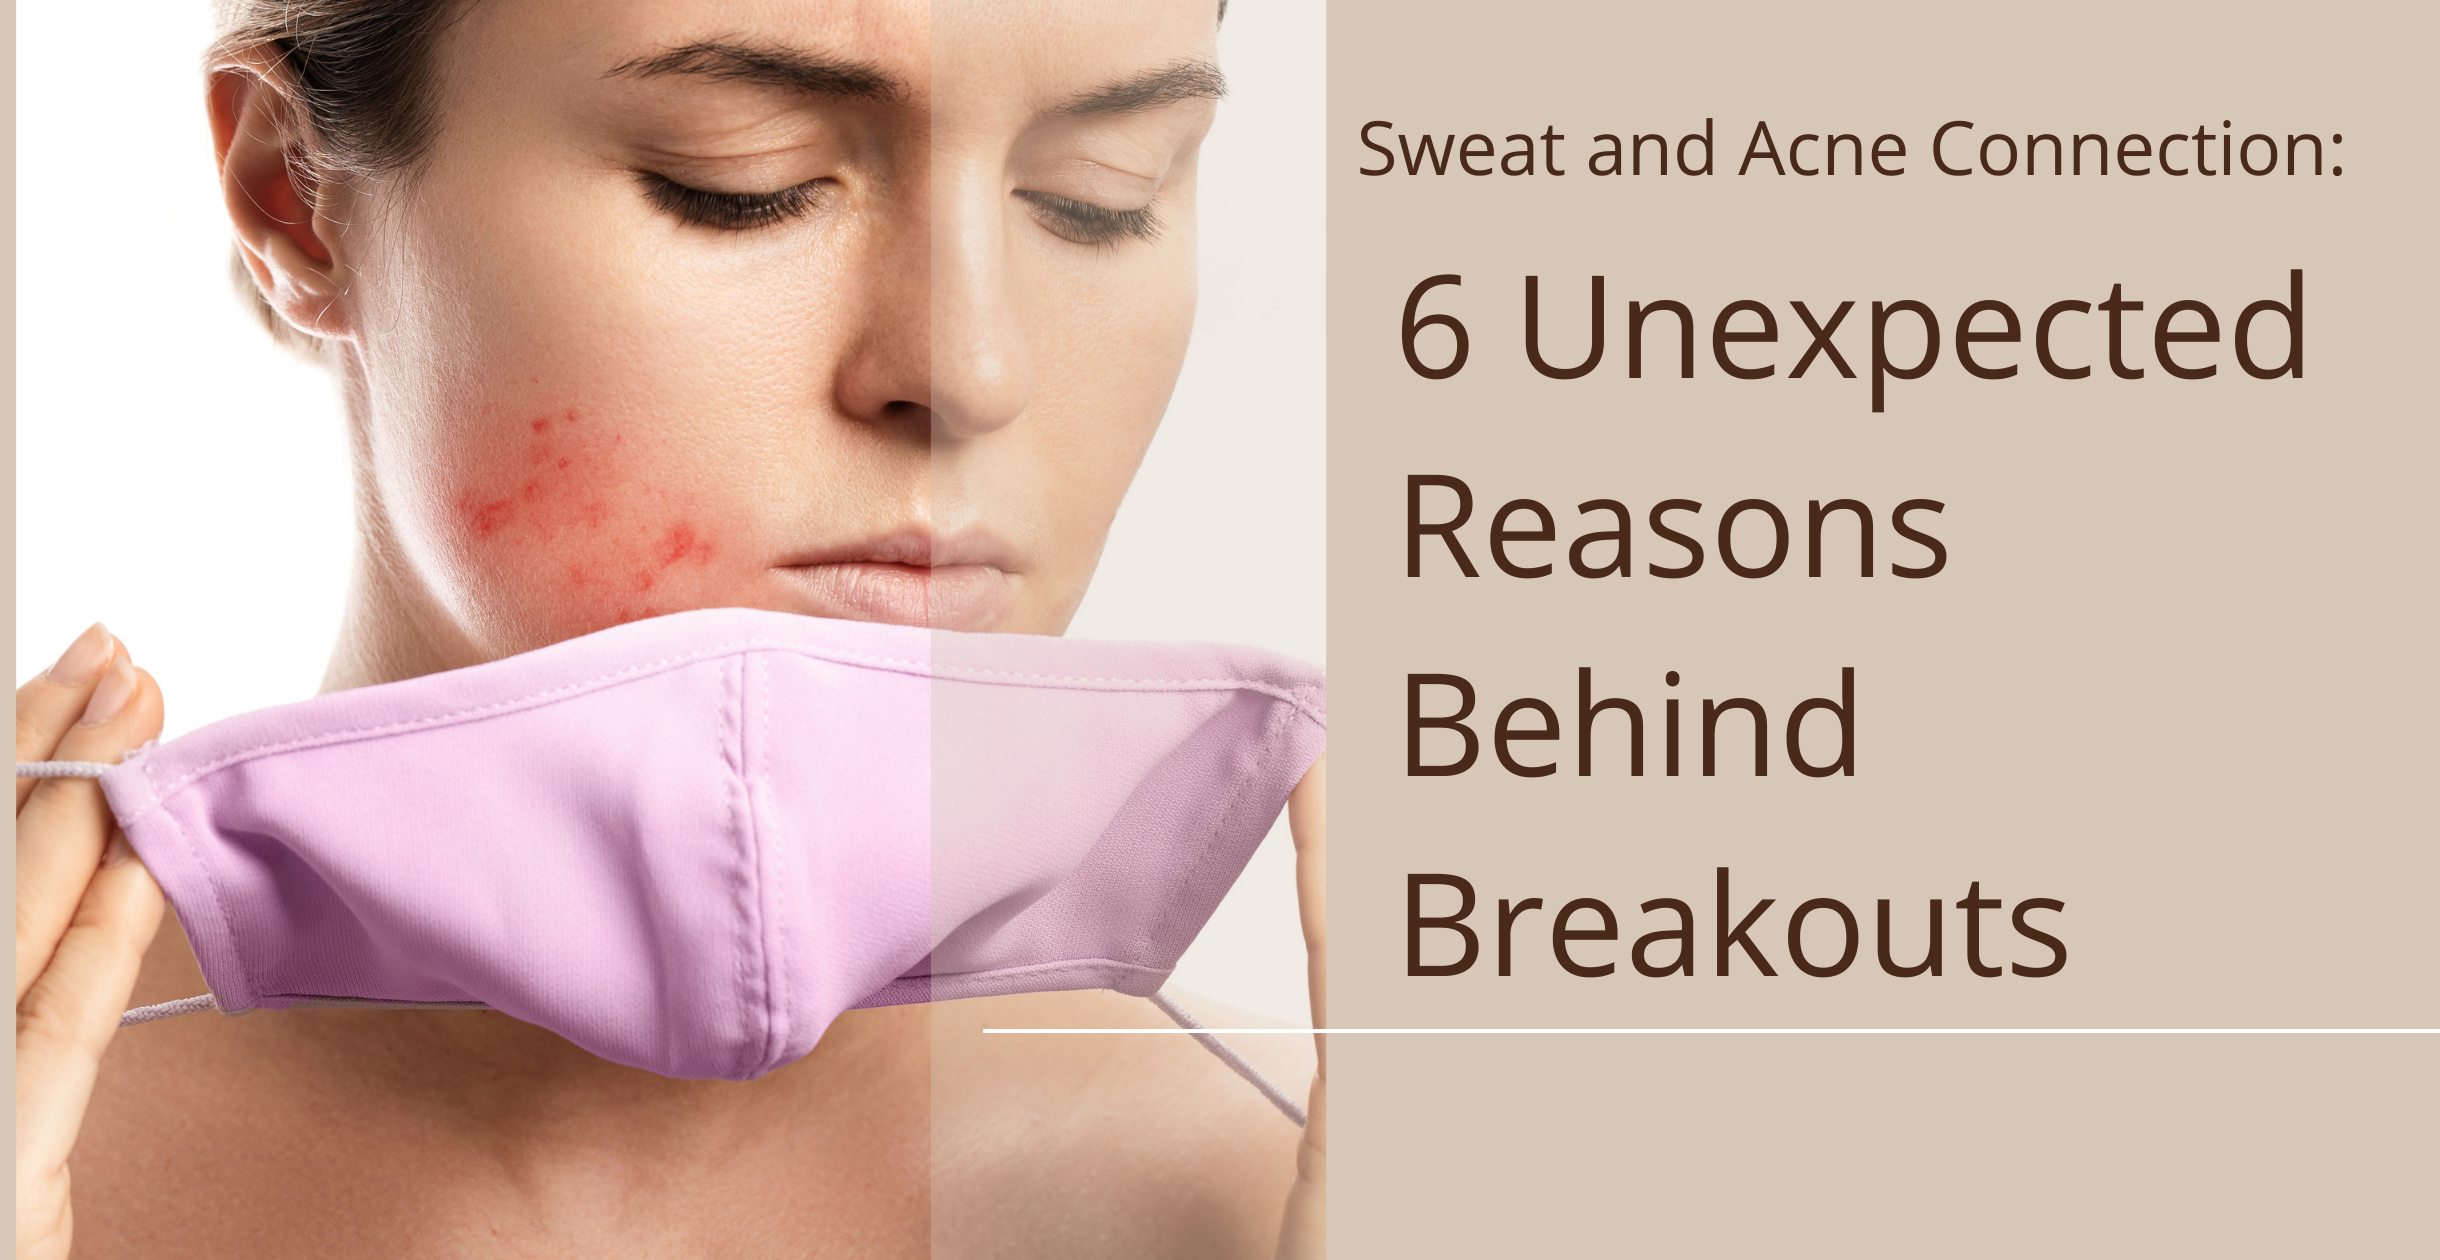 Sweat and Acne Connection: 6 Unexpected Reasons Behind Breakouts